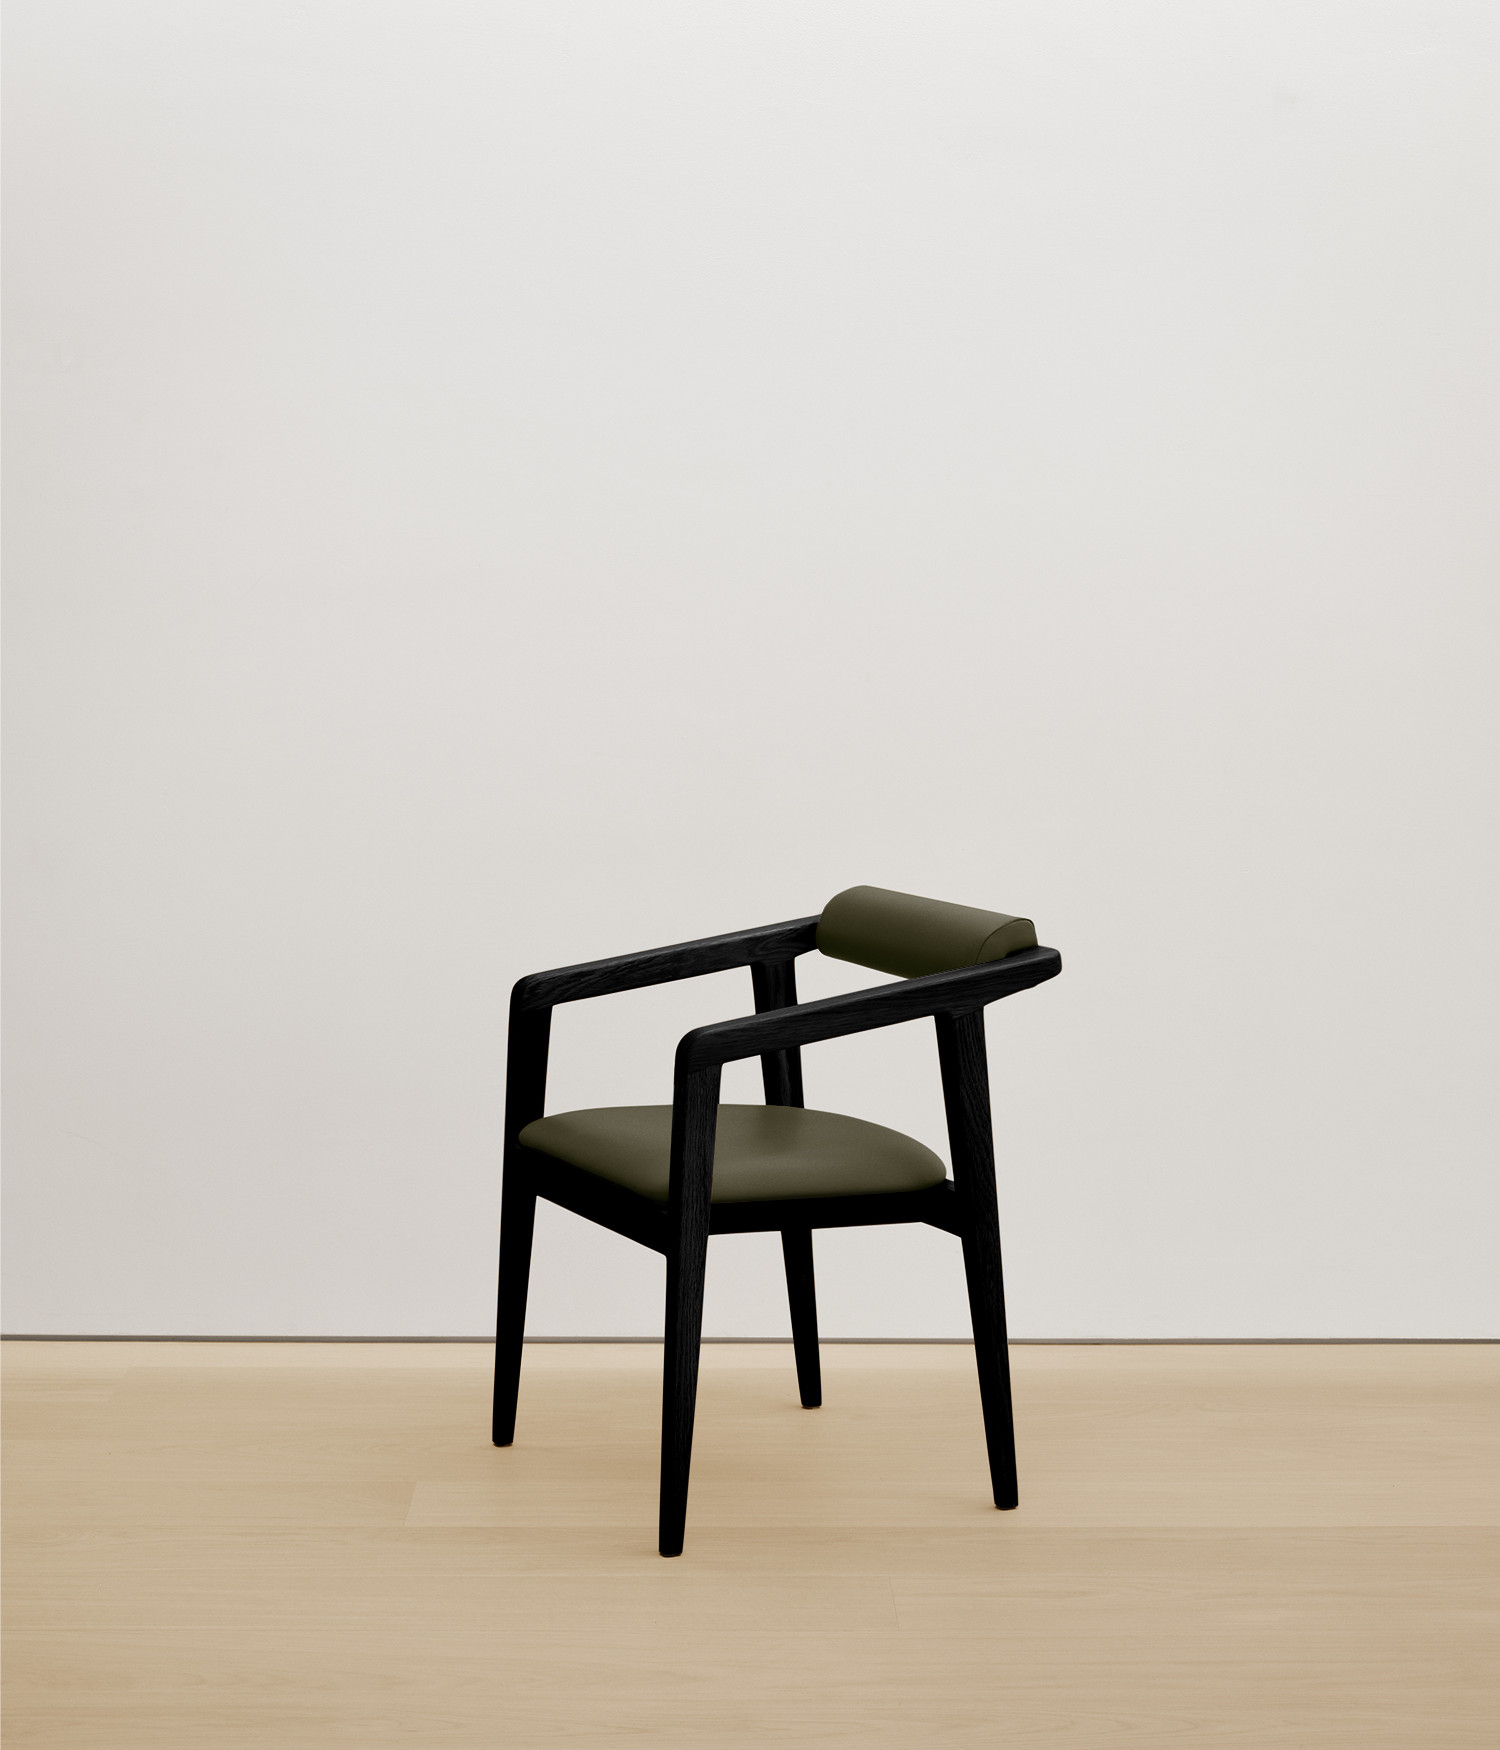  black-stained-oak chair with forest color upholstered seat